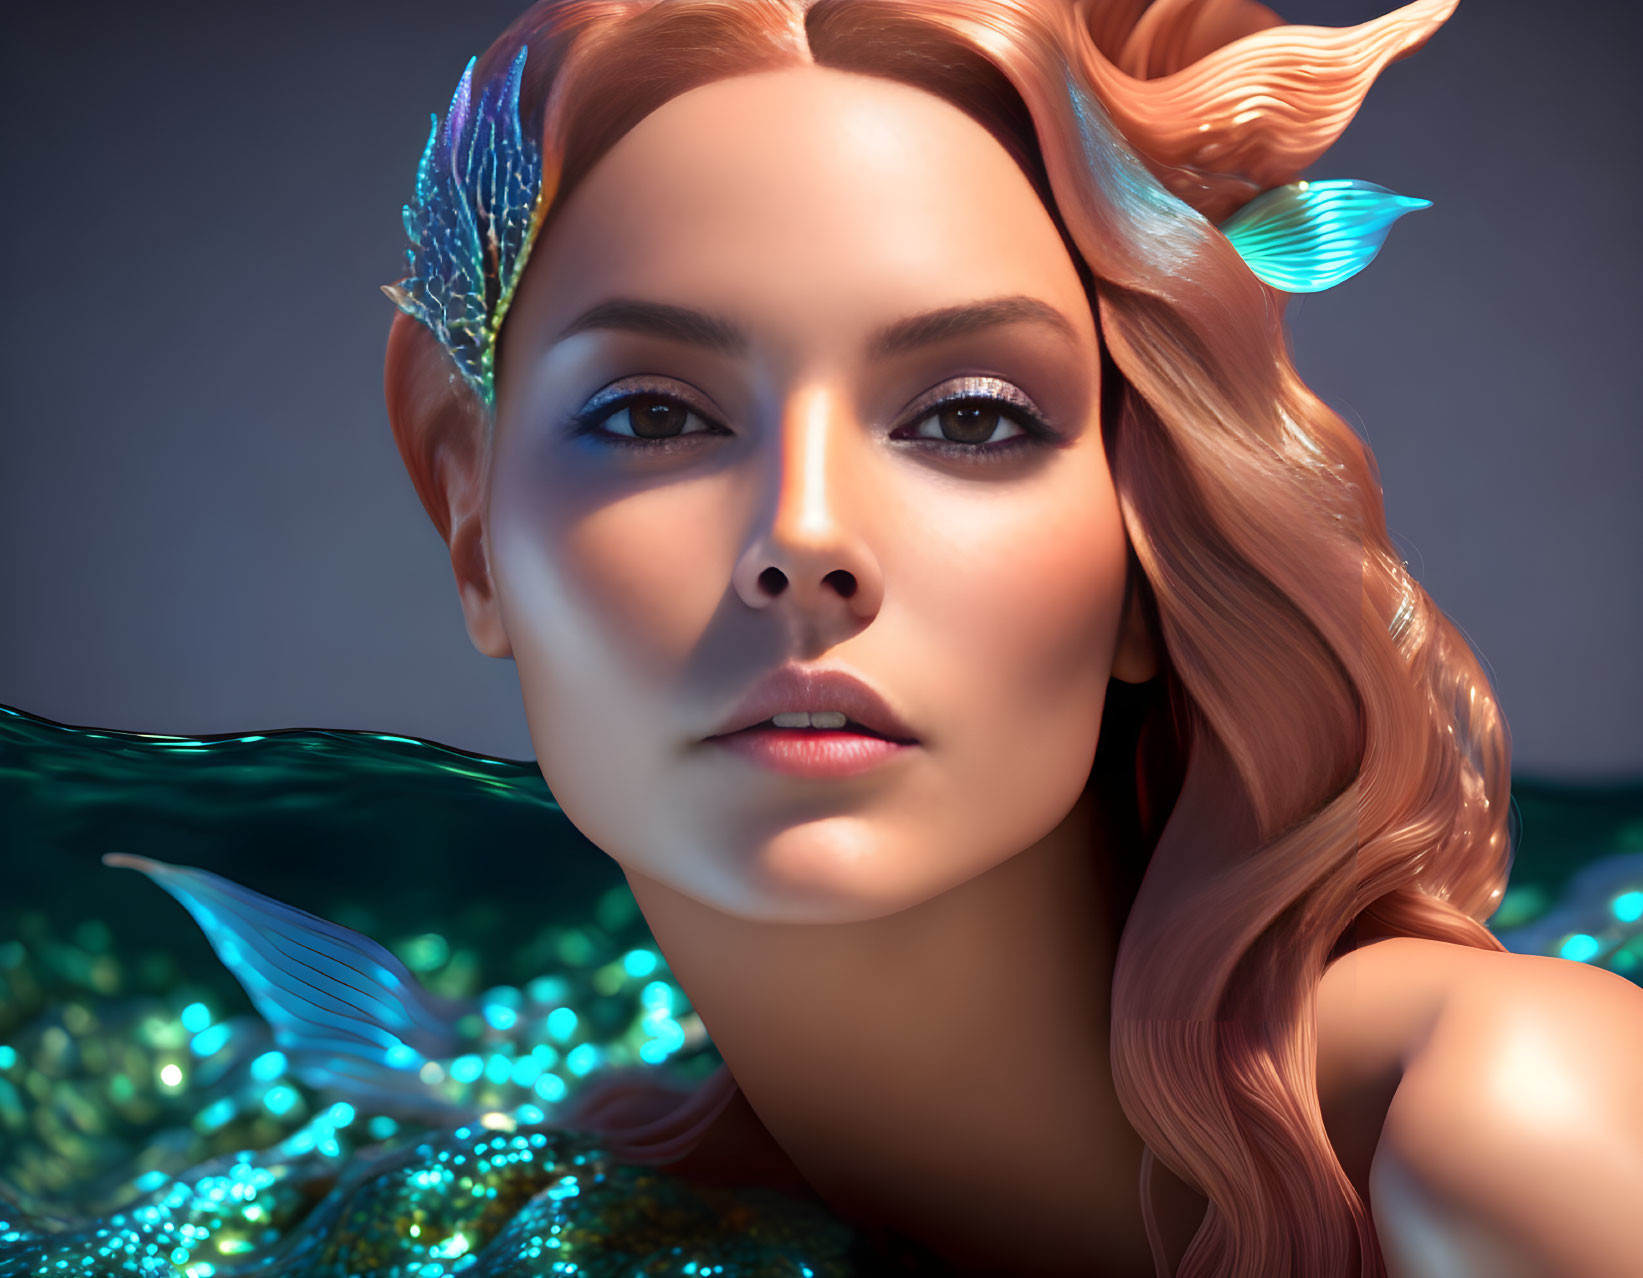 Woman with Mermaid Features Close-Up on Cool-Toned Background